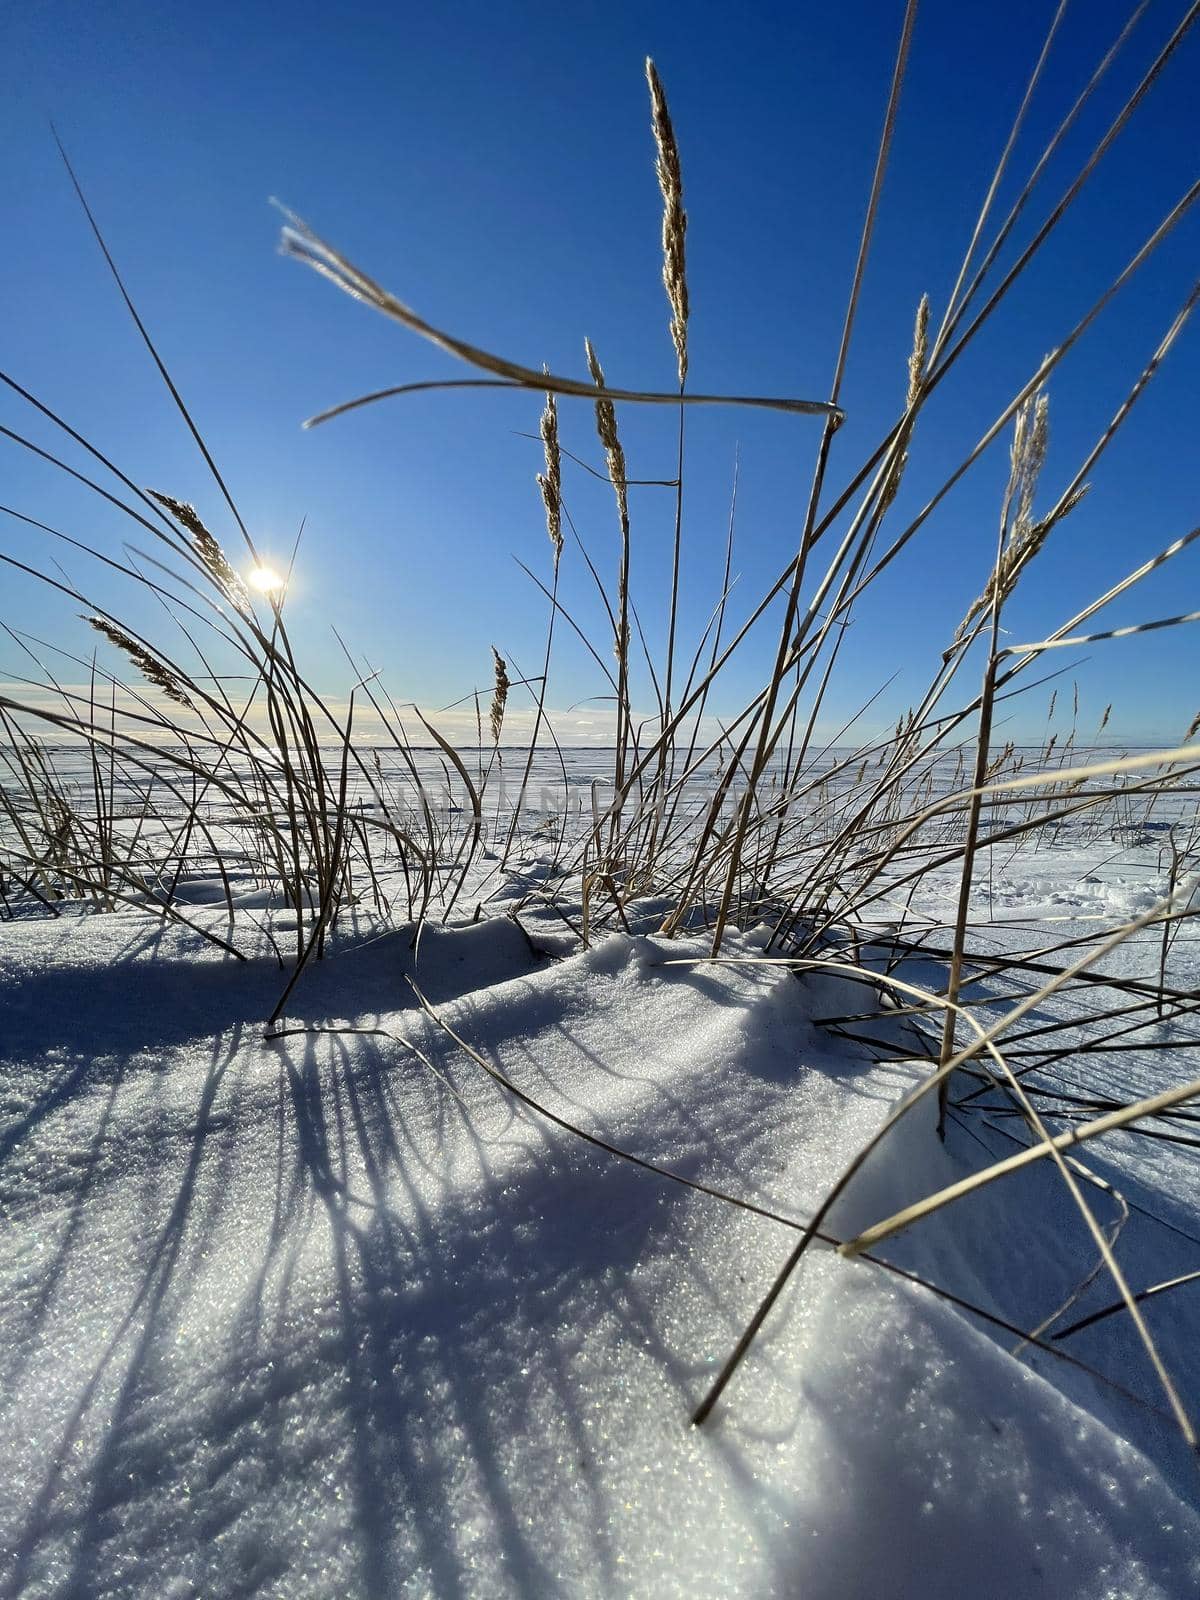 The dry grass ears on a wind on a snow-covered field in clear sunny frosty weather, long shadows from stalks on snow, a deserted place, boundless space, the clear blue sky. High quality image